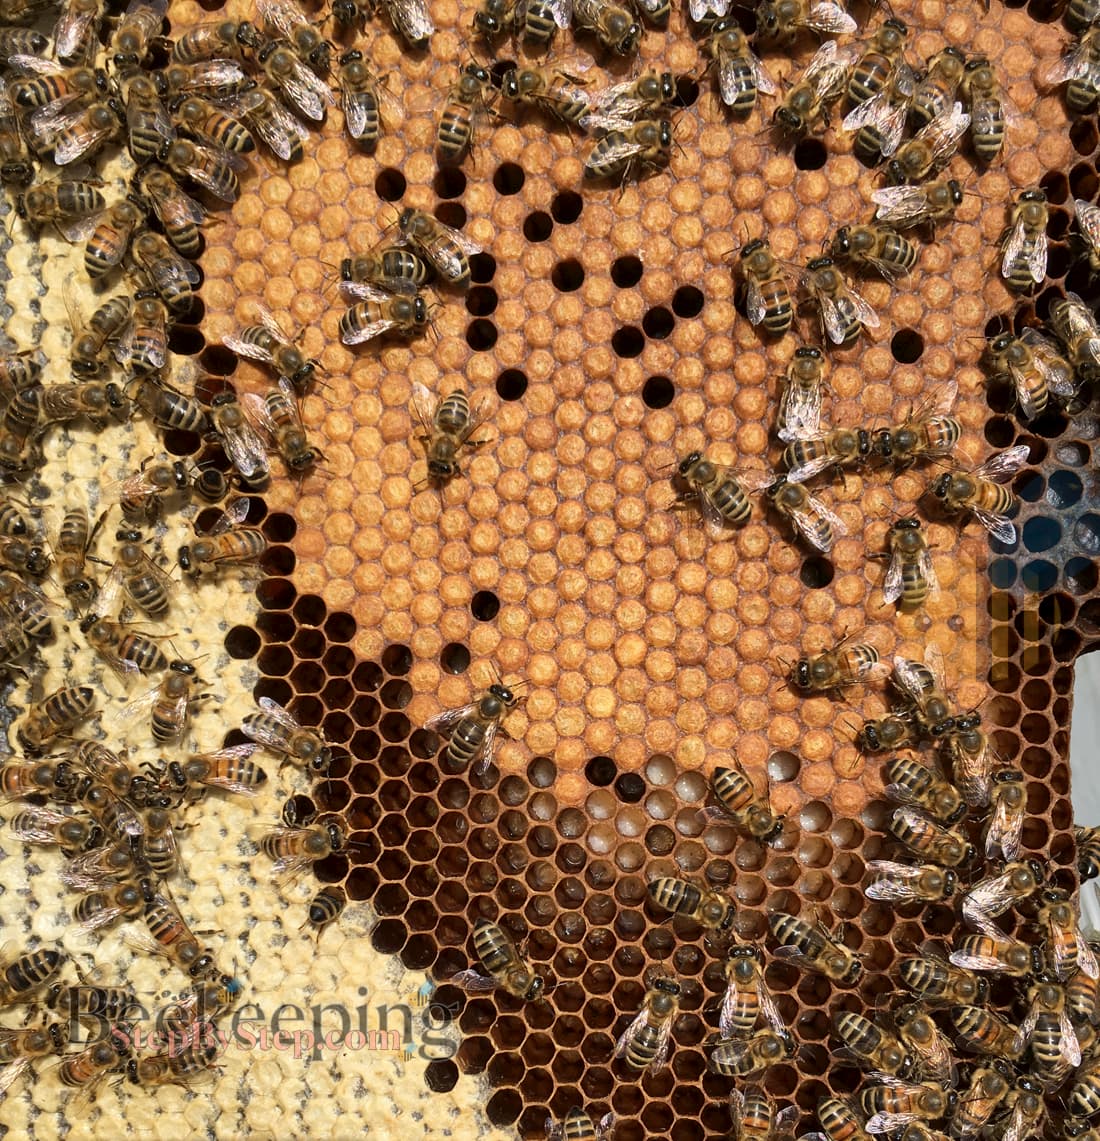 Frame with brood and honey